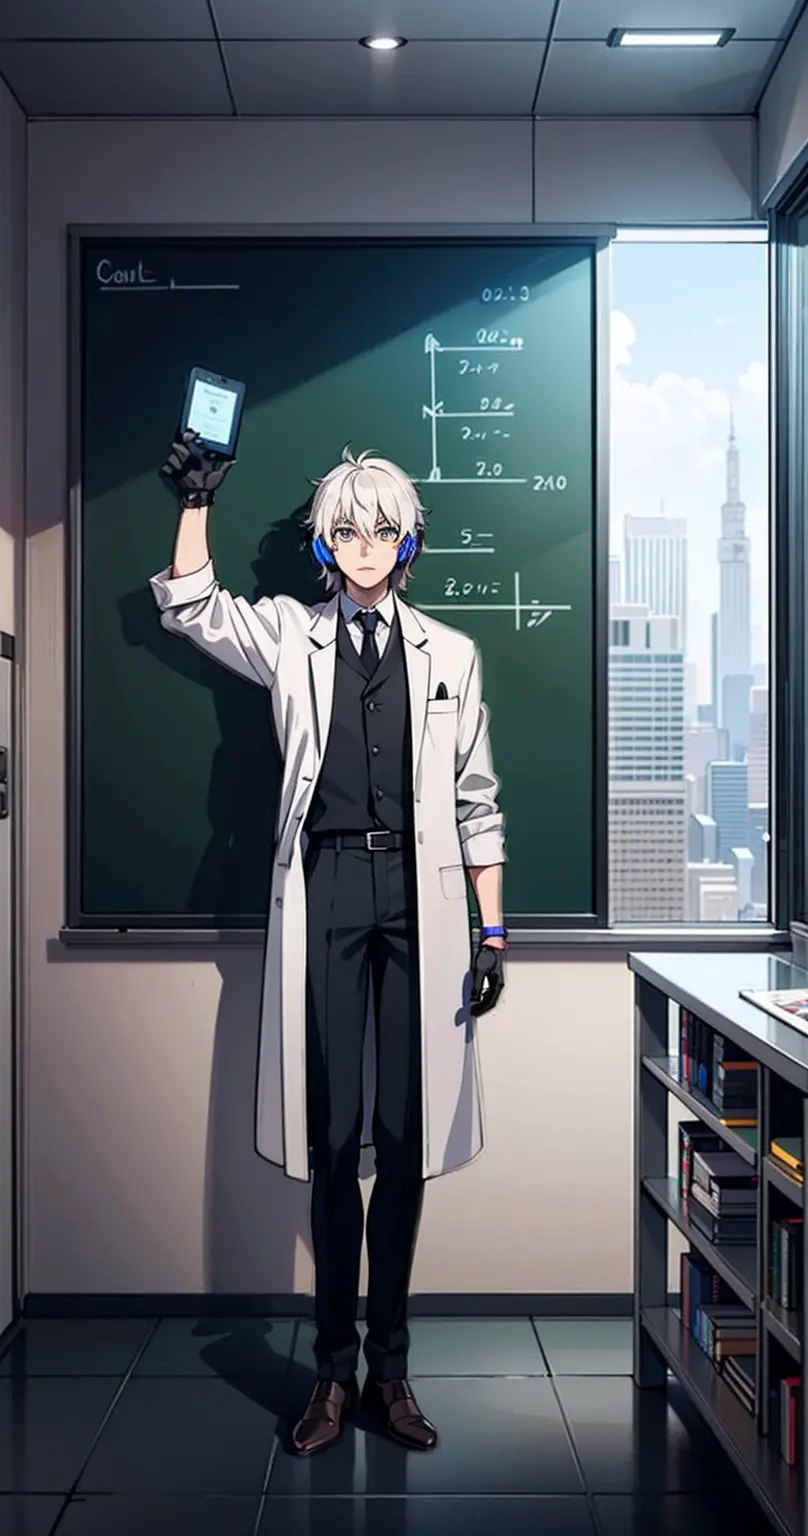 A robot teacher with robotic arms and bionic eyes, Wearing a white lab coat and holding a holographic tablet, Stand in front of ...